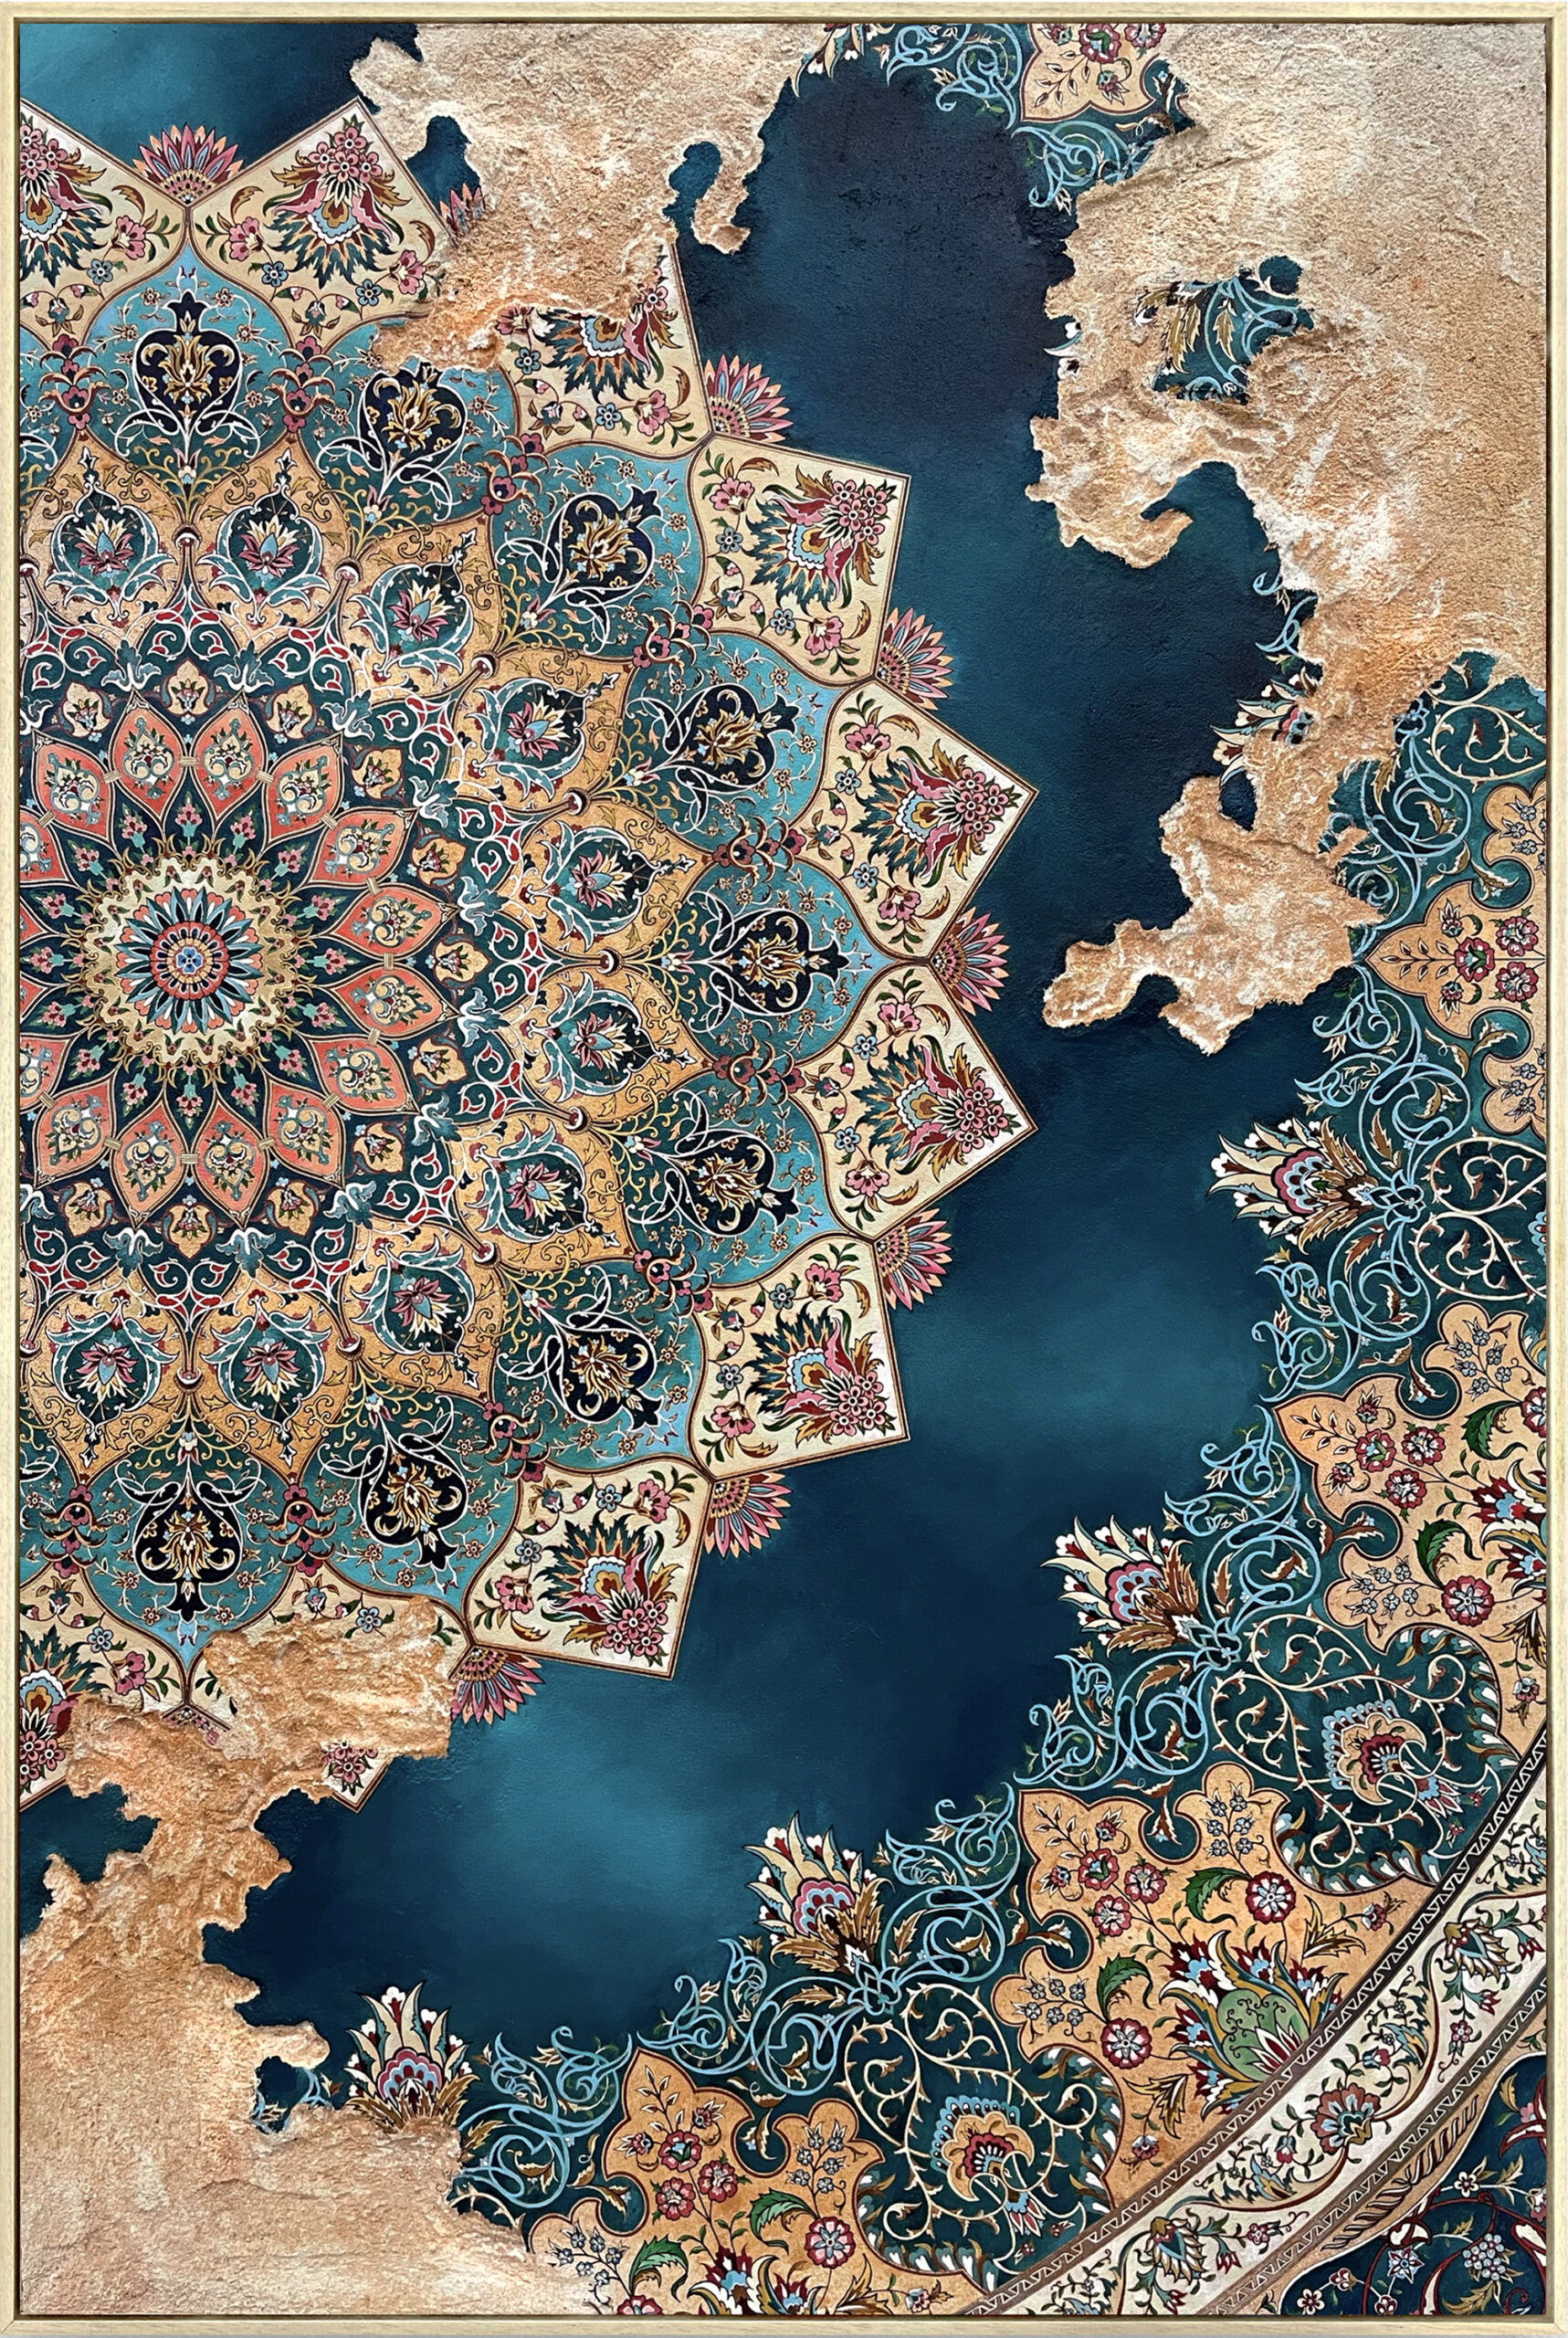 An acrylic painting on concrete in the pattern of an ornate carpet.